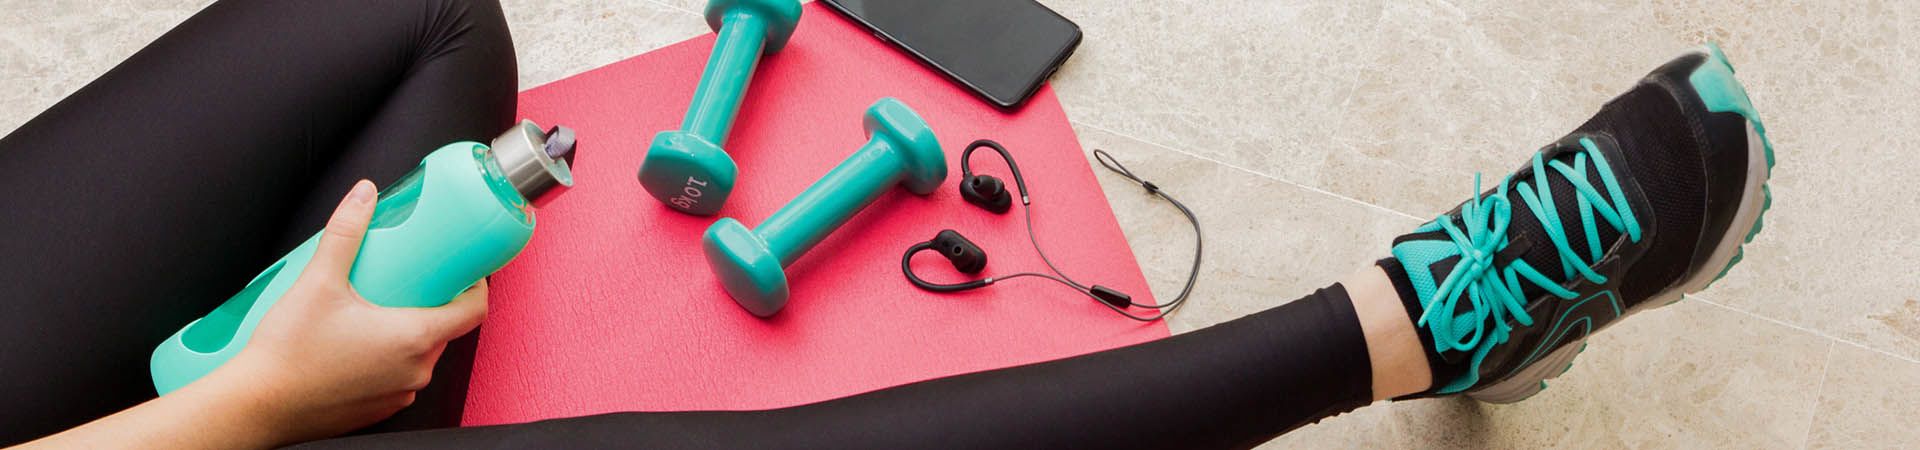 Close-up of fitness accessories: yoga mat, small dumbbells, sports clothing.